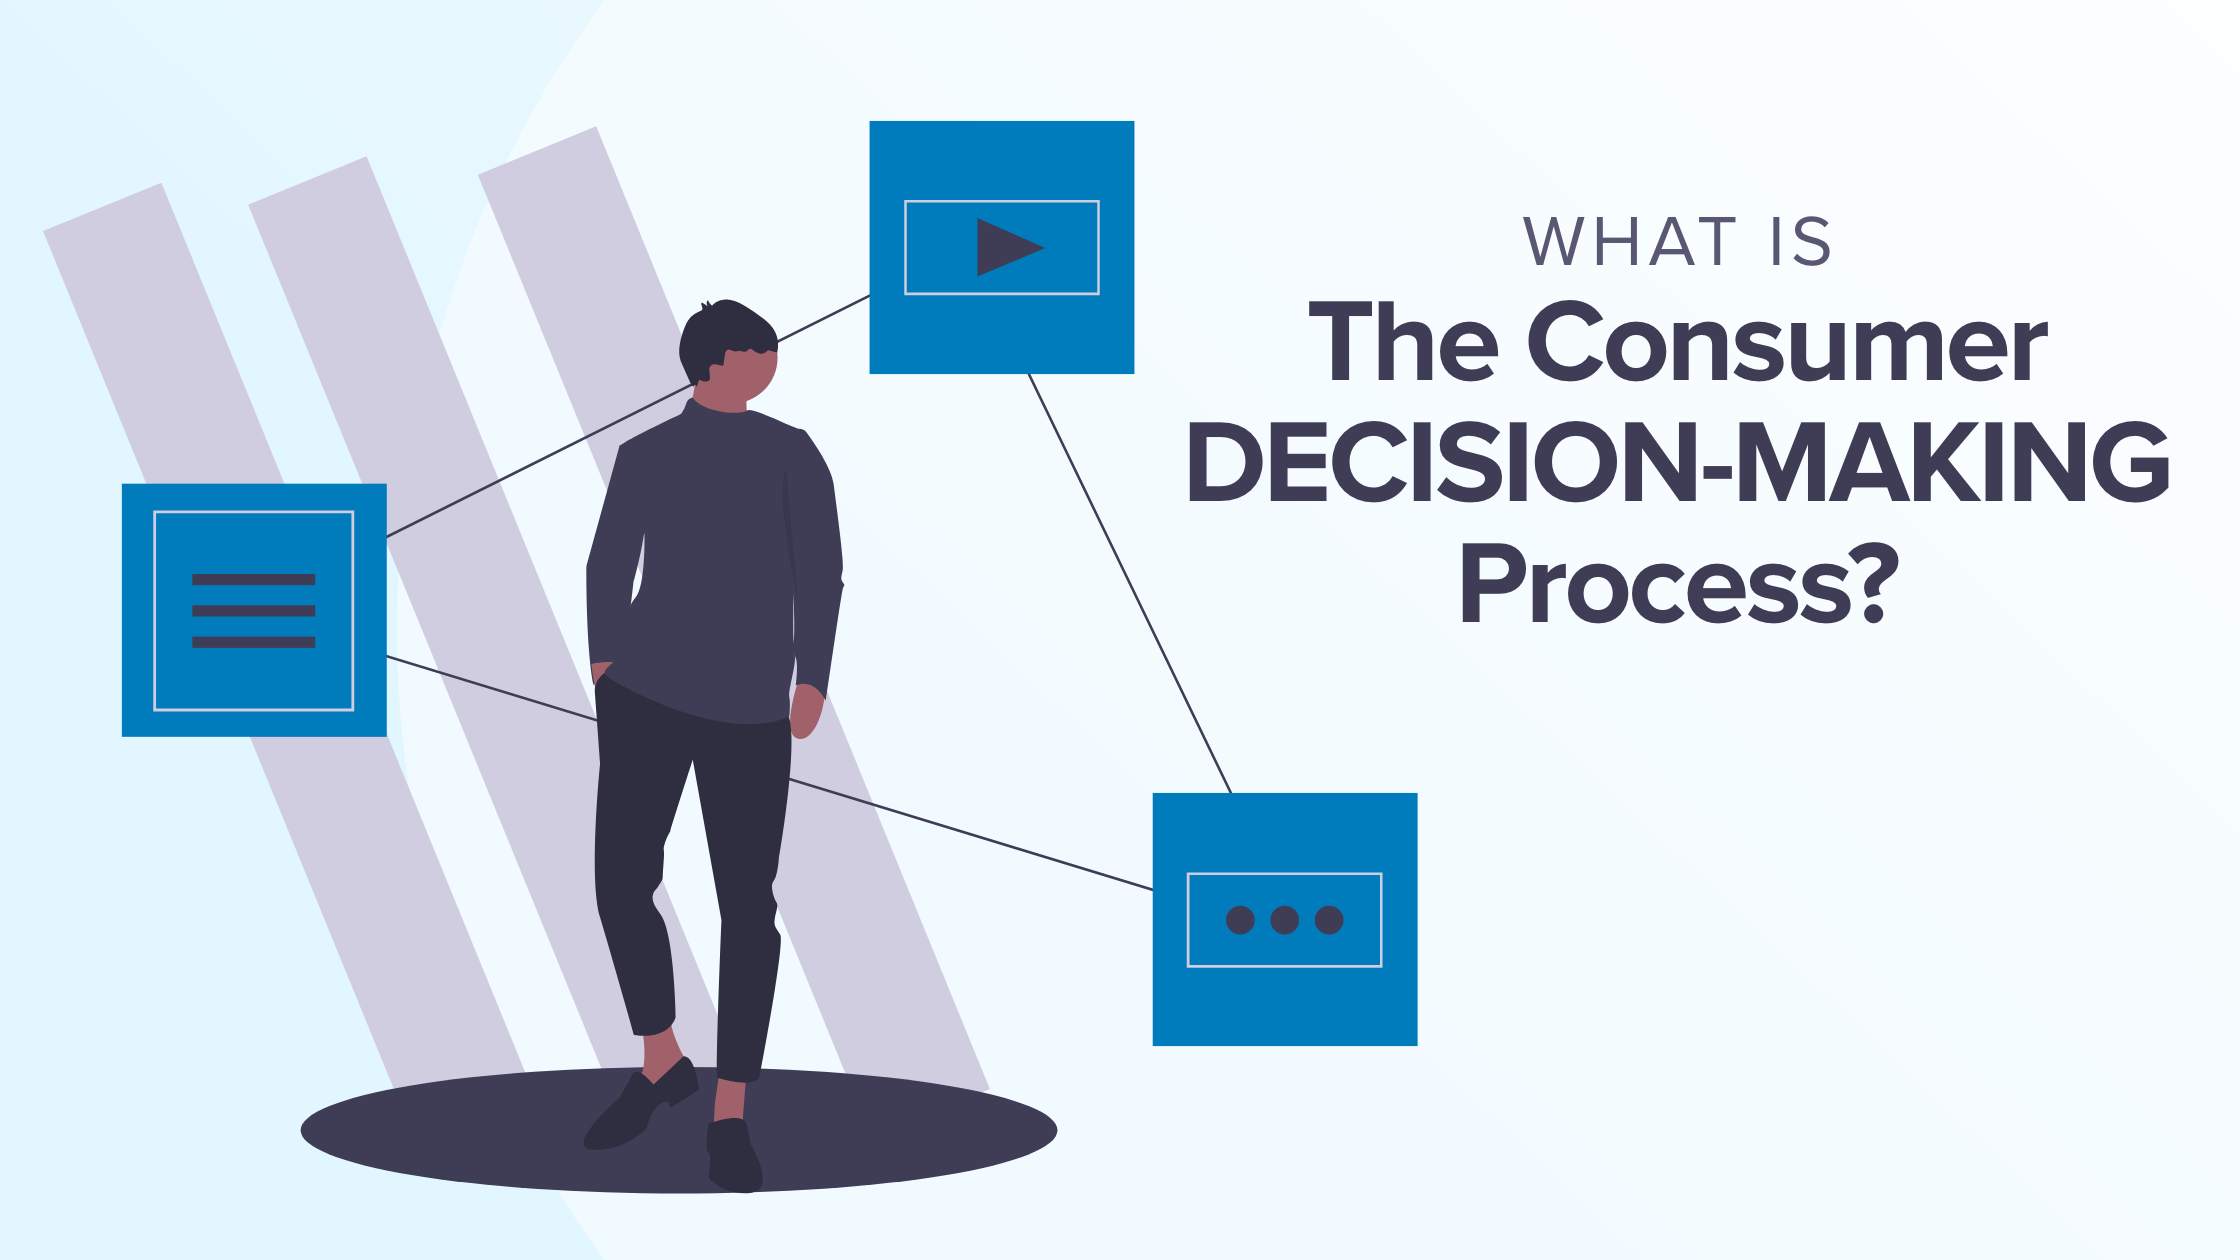 making decisions and managing social processes